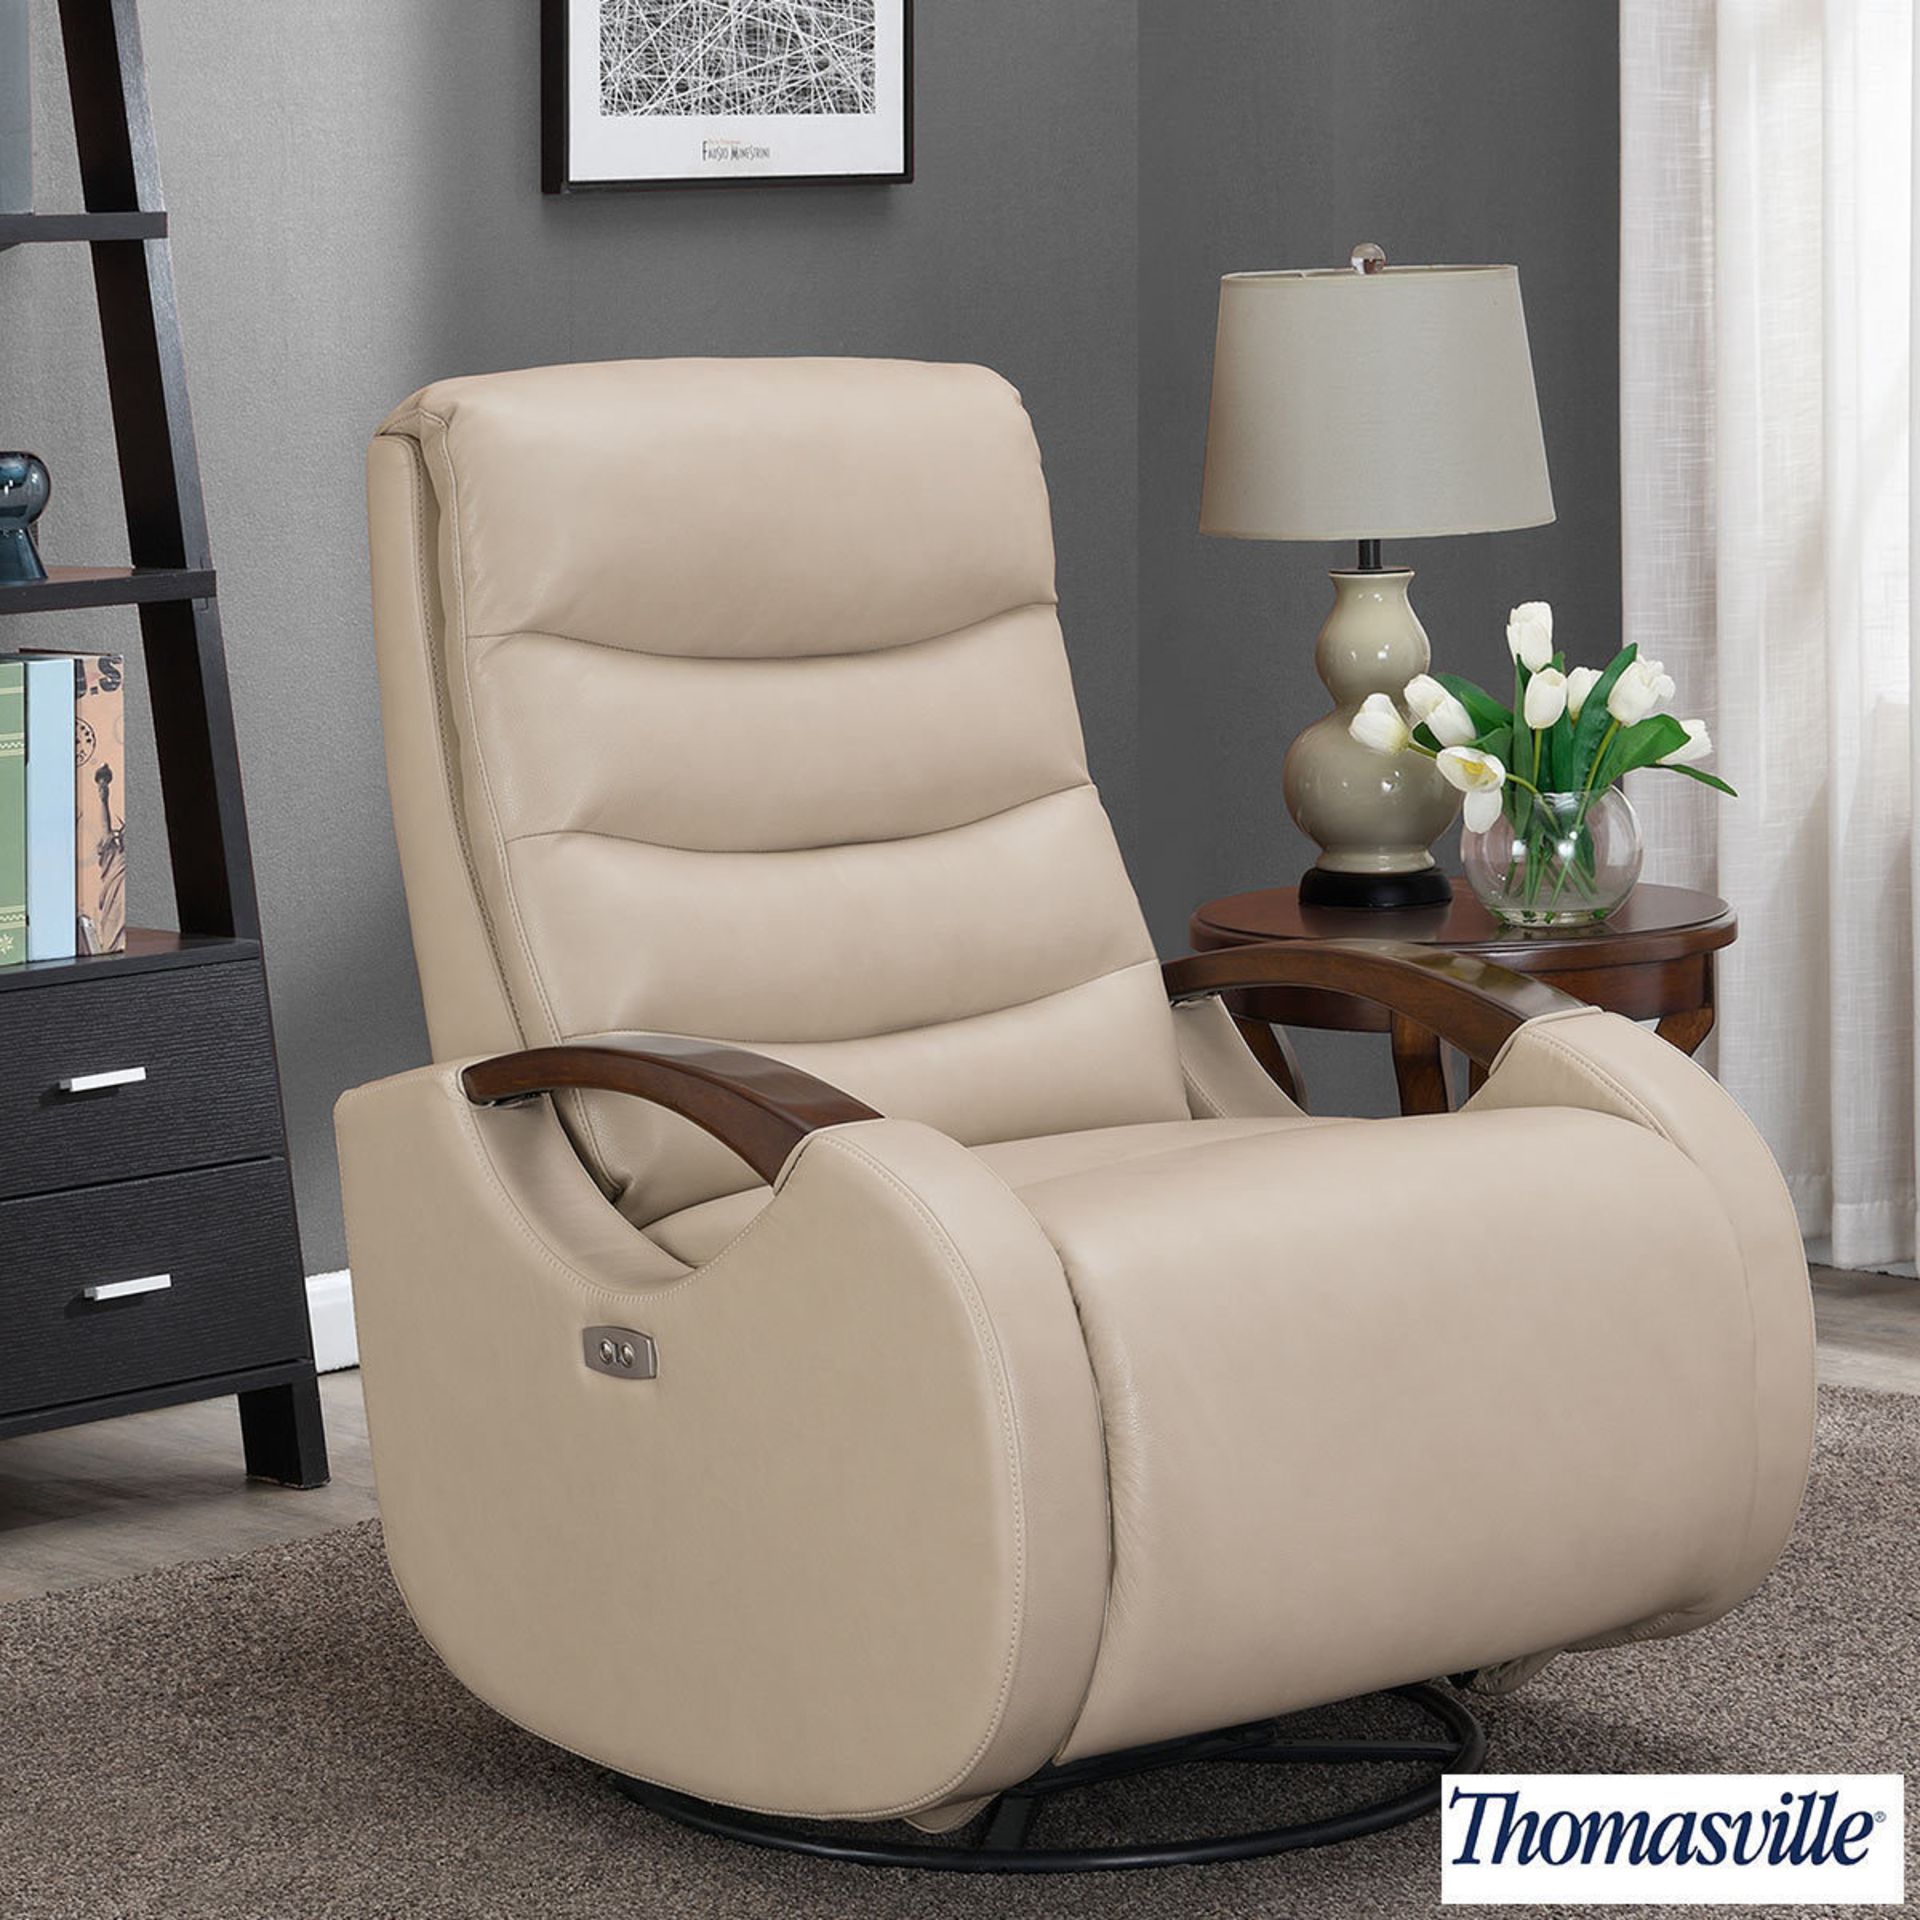 1 BOXED THOMASVILLE BENSON LEATHER POWER GLIDER RECLINER CHAIR RRP Â£599 (PICTURES FOR